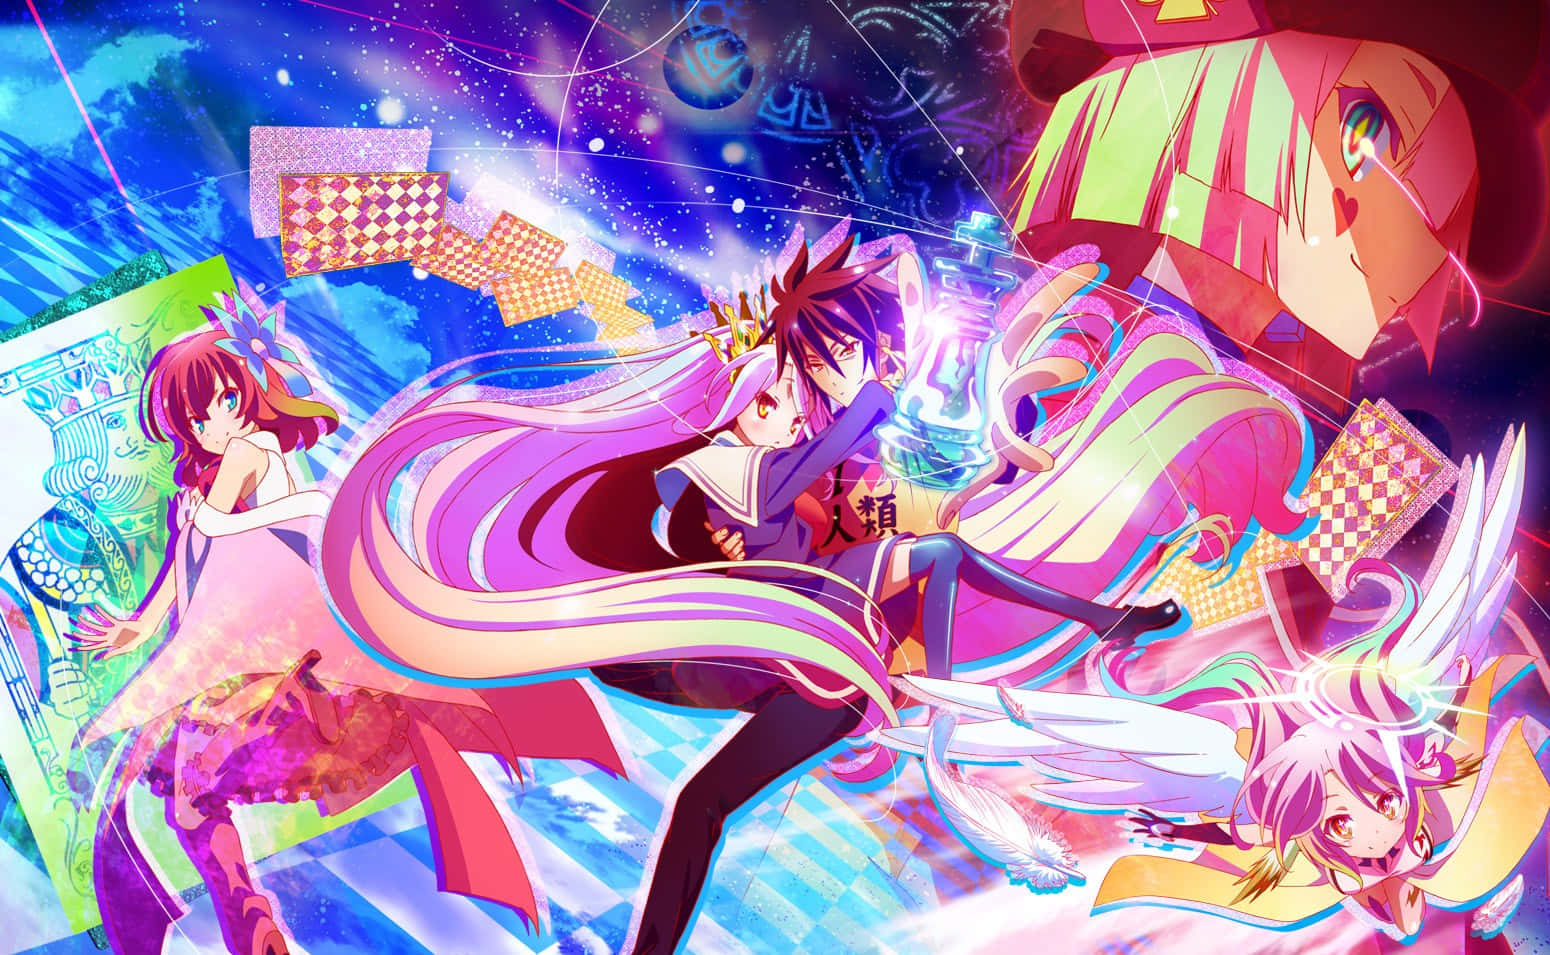 Jump into the world of 'No Game No Life' with siblings Sora and Shiro!